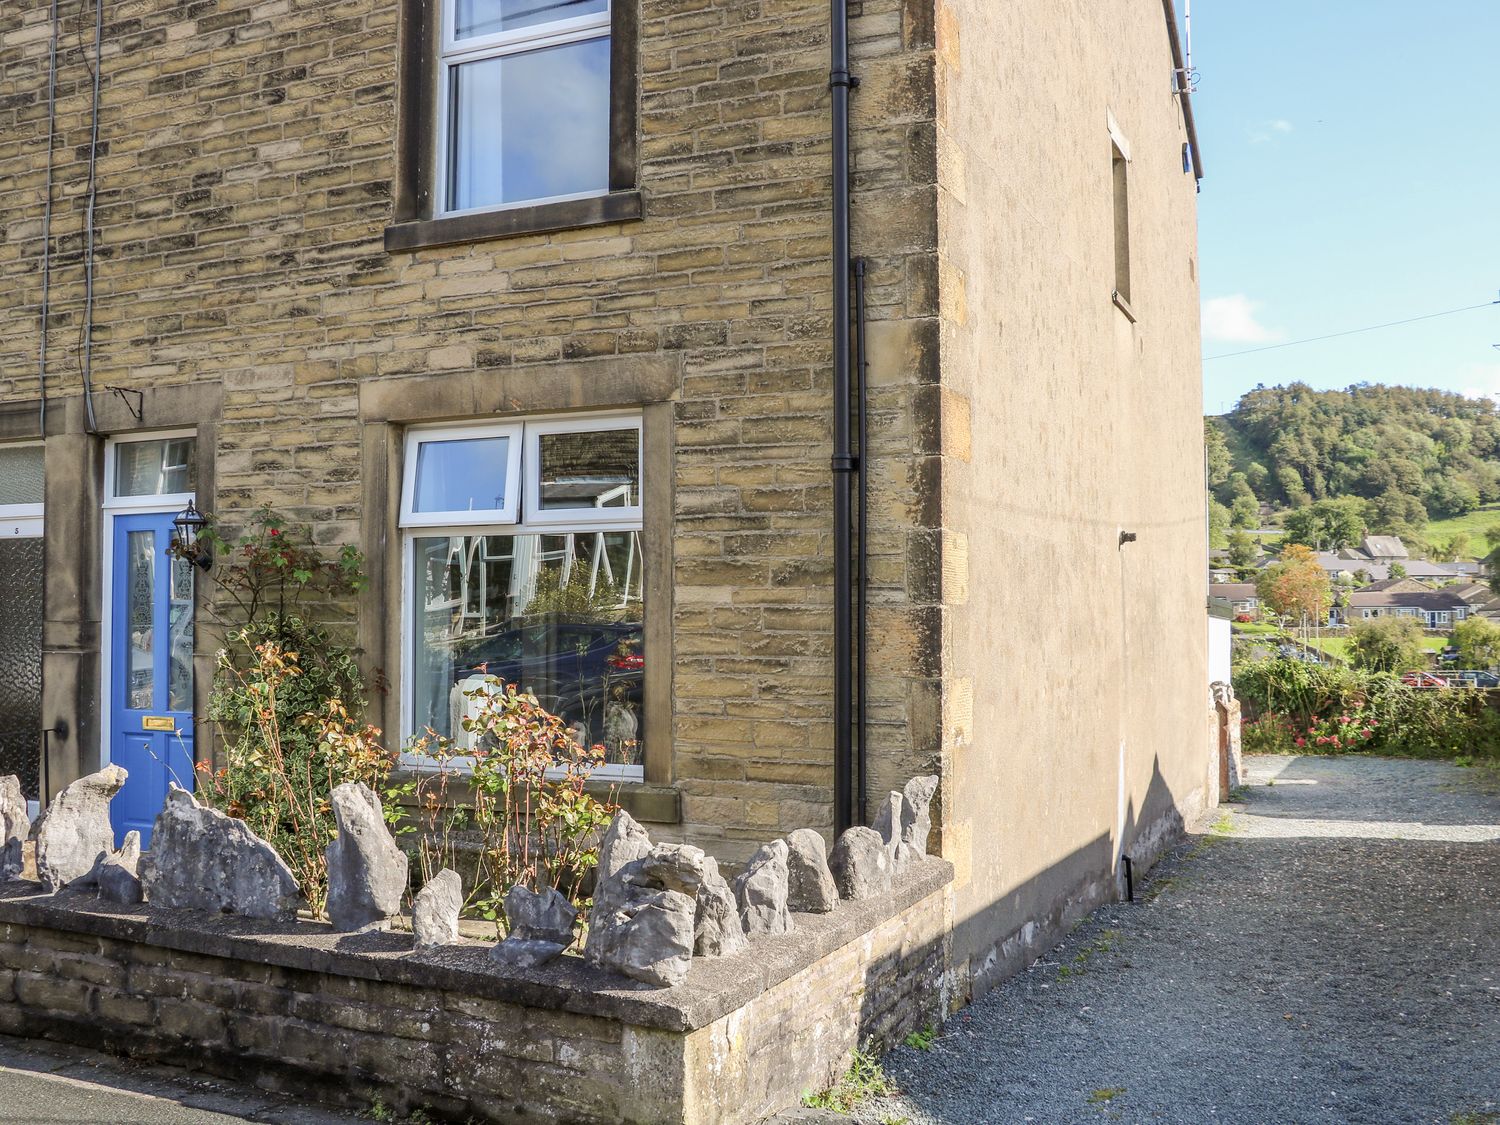 West View Cottage - Yorkshire Dales - 960844 - photo 1